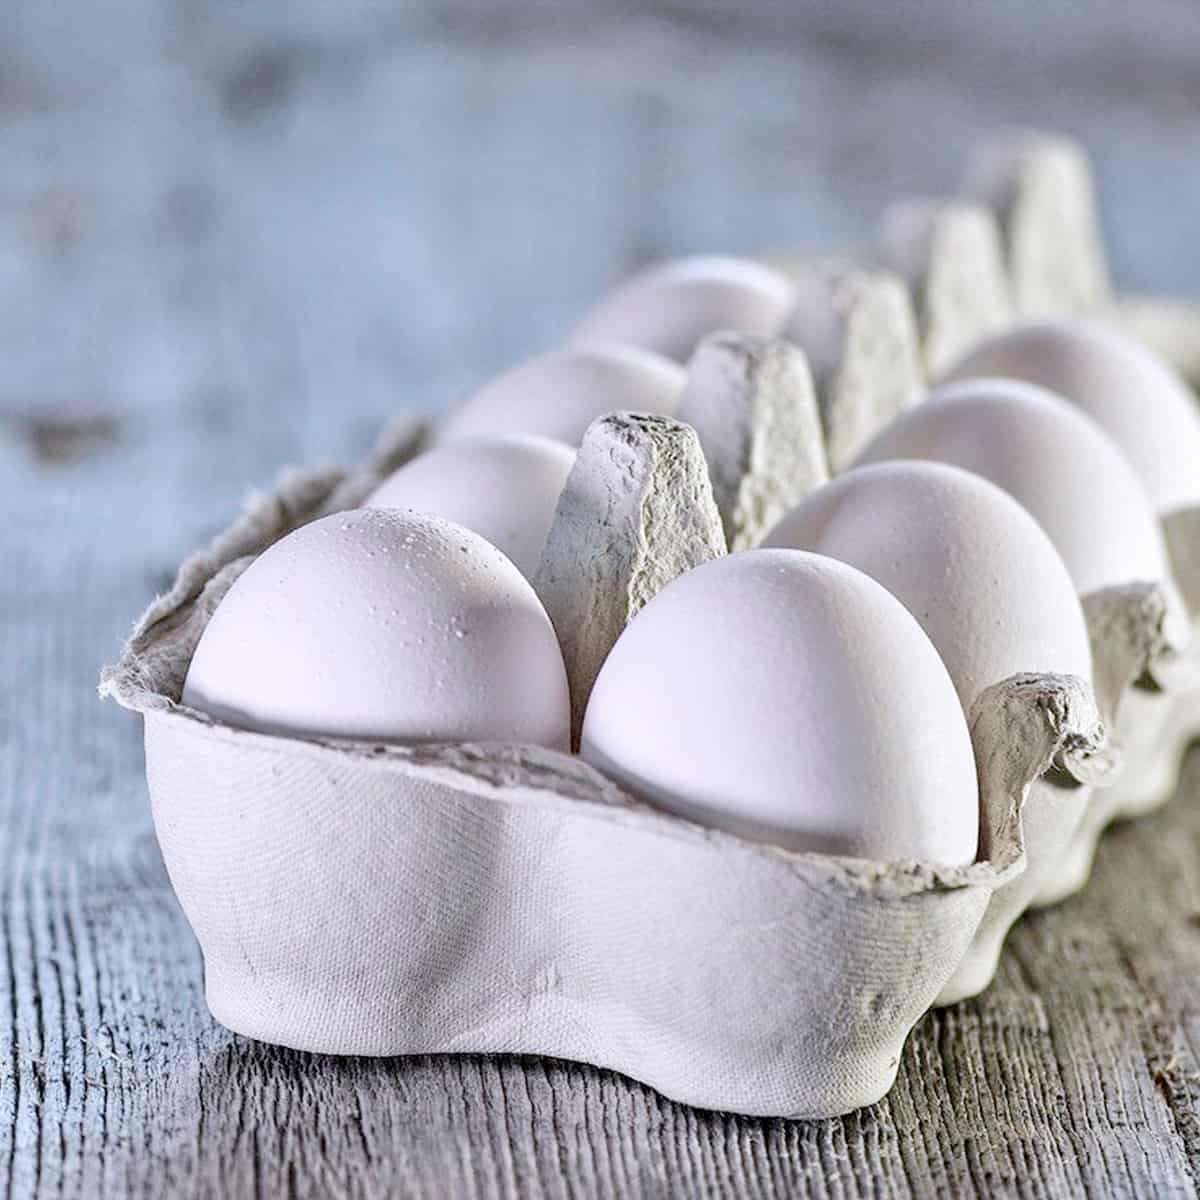 9 Ways to Preserve Eggs (Safely)